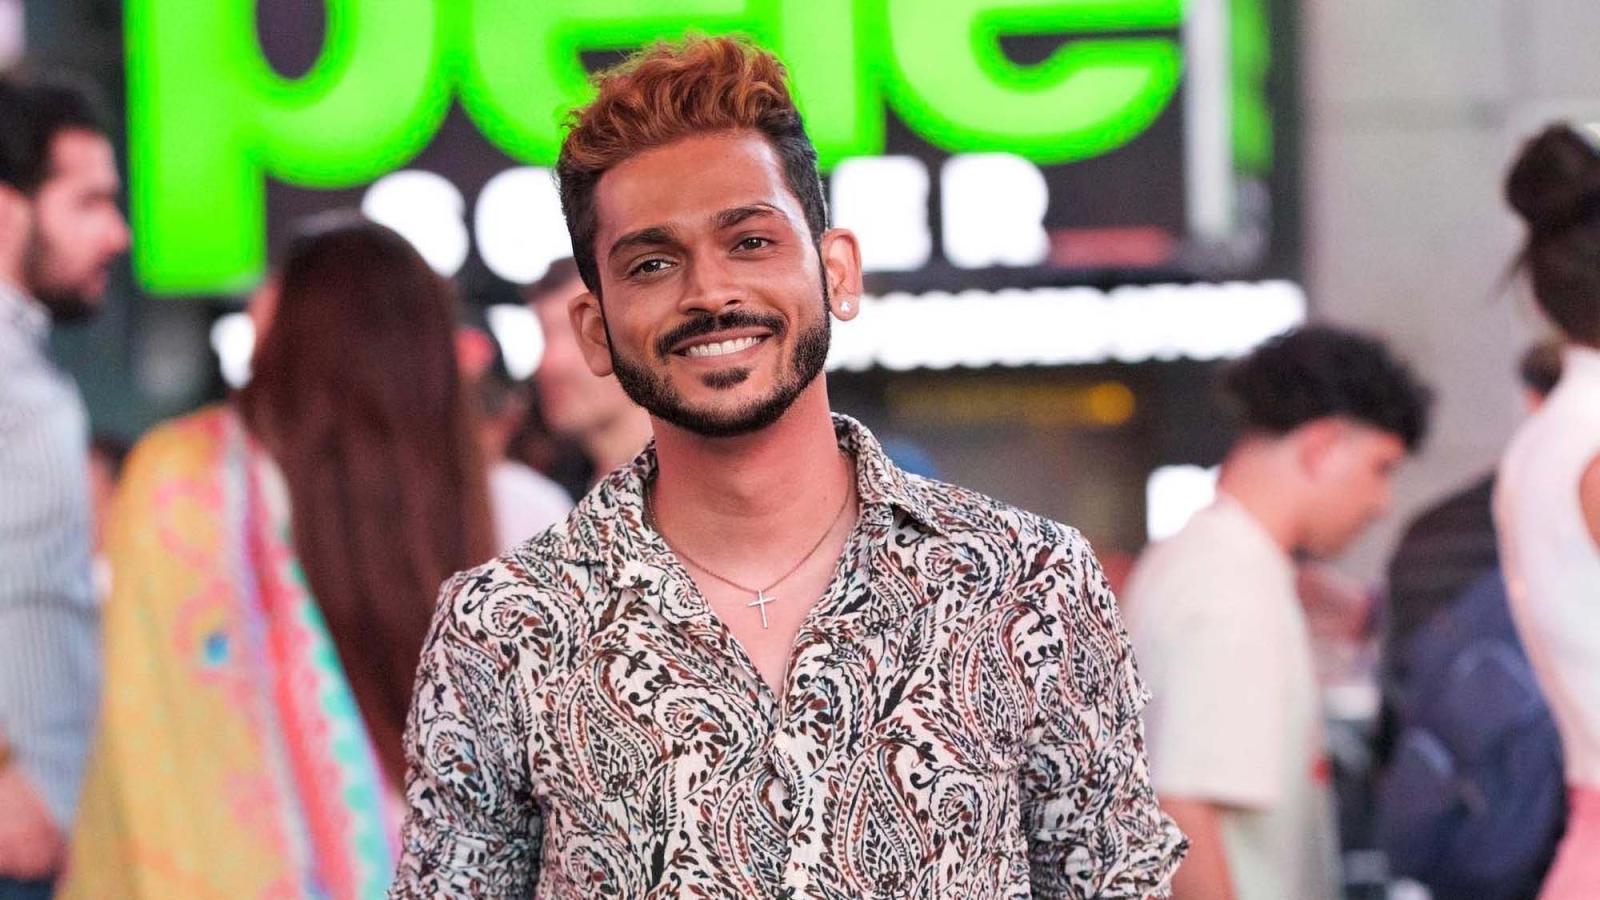 Chinmay Bonde, wearing a colorful shirt, stands in a crowd